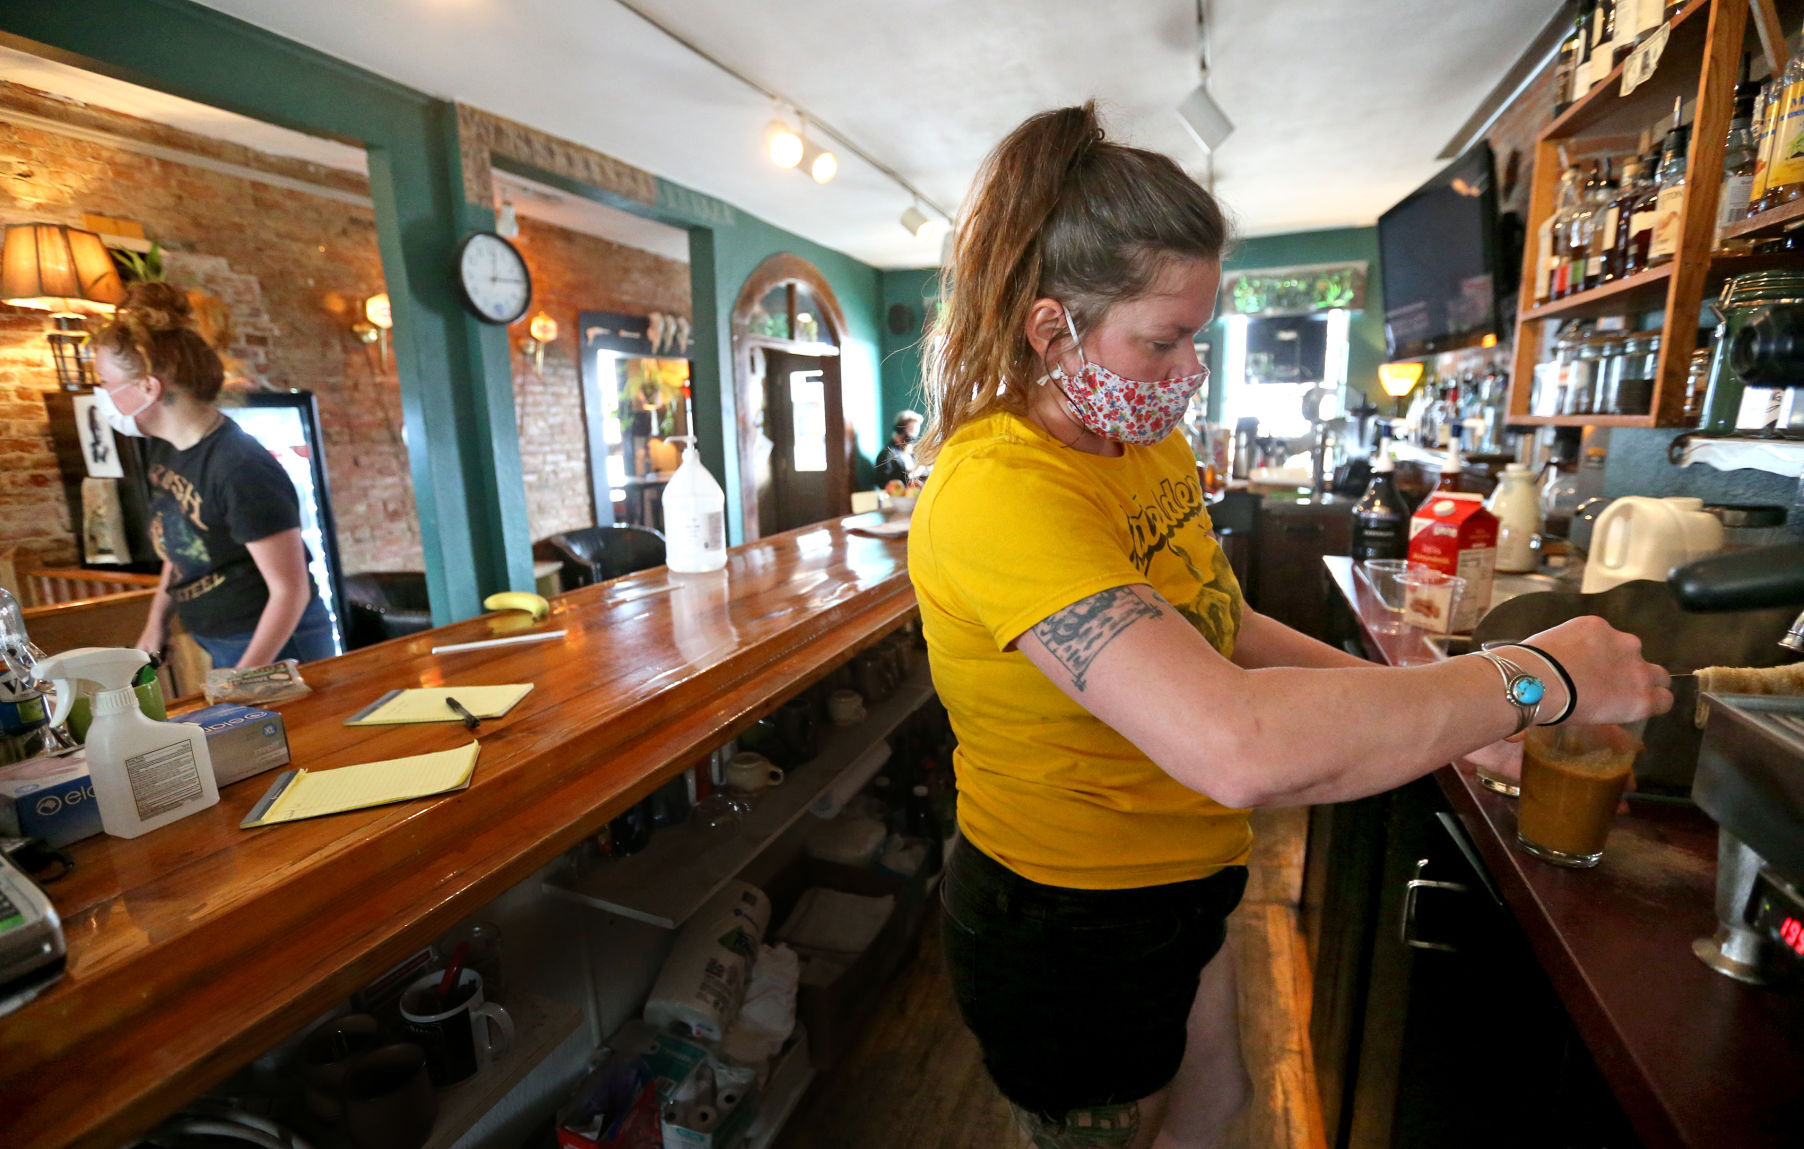 Co-owner Trish Jansen makes a drink for a customer at Monk’s Kaffee Pub, which received a $20,000 grant via an Iowa initiative. PHOTO CREDIT: JESSICA REILLY, Telegraph Herald